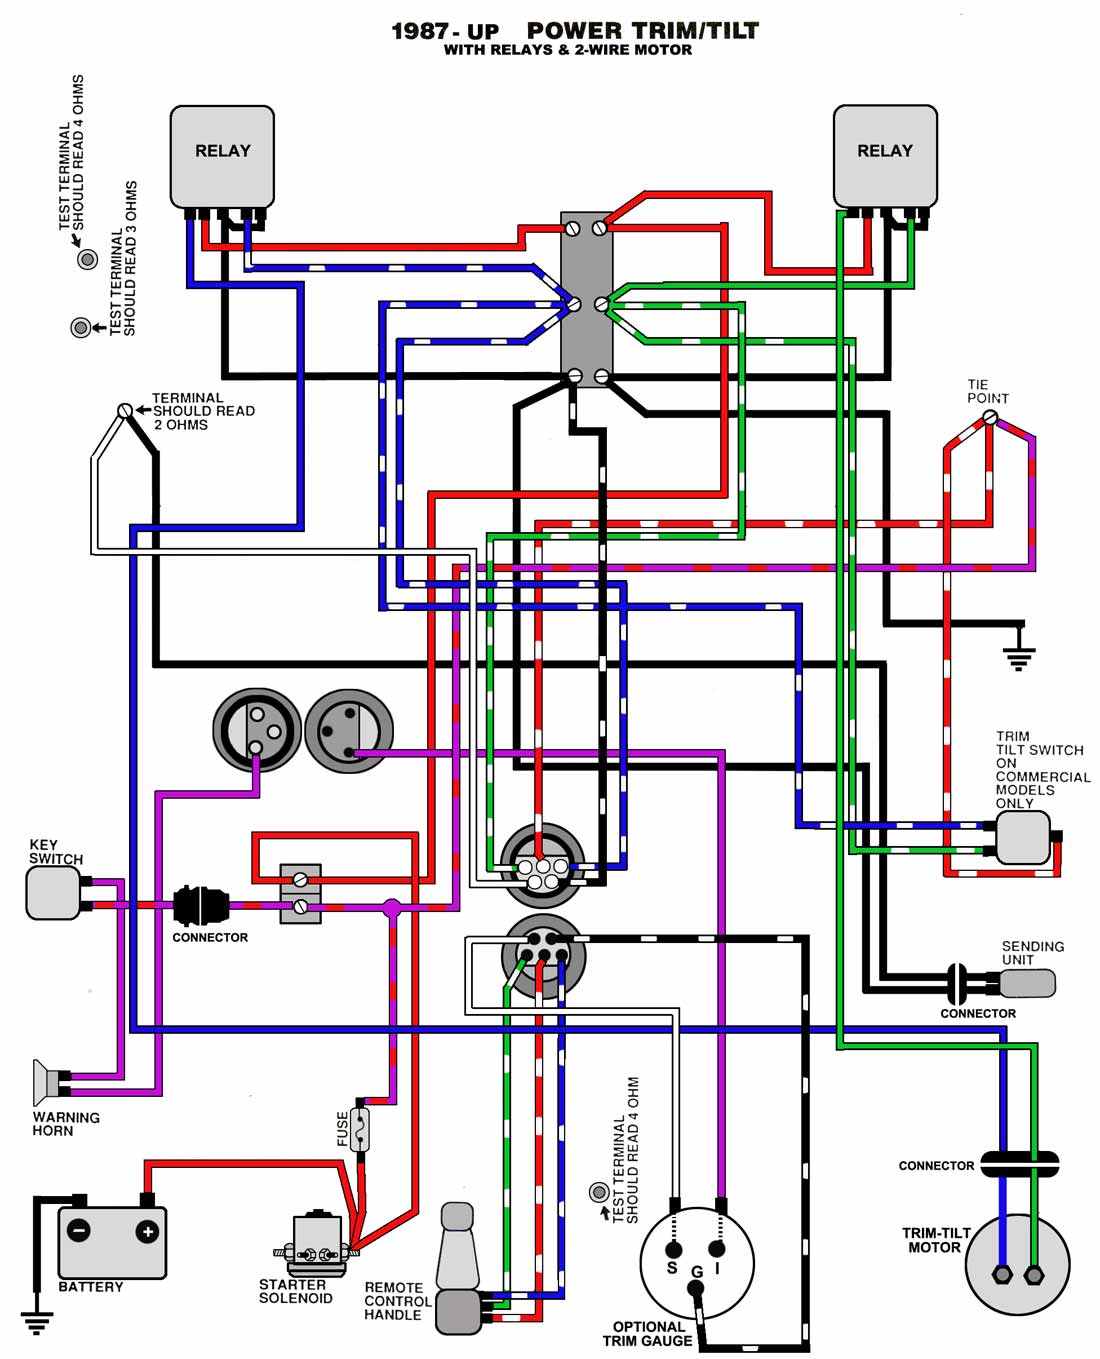 Common Outboard Motor Trim and Tilt System Wiring Diagrams